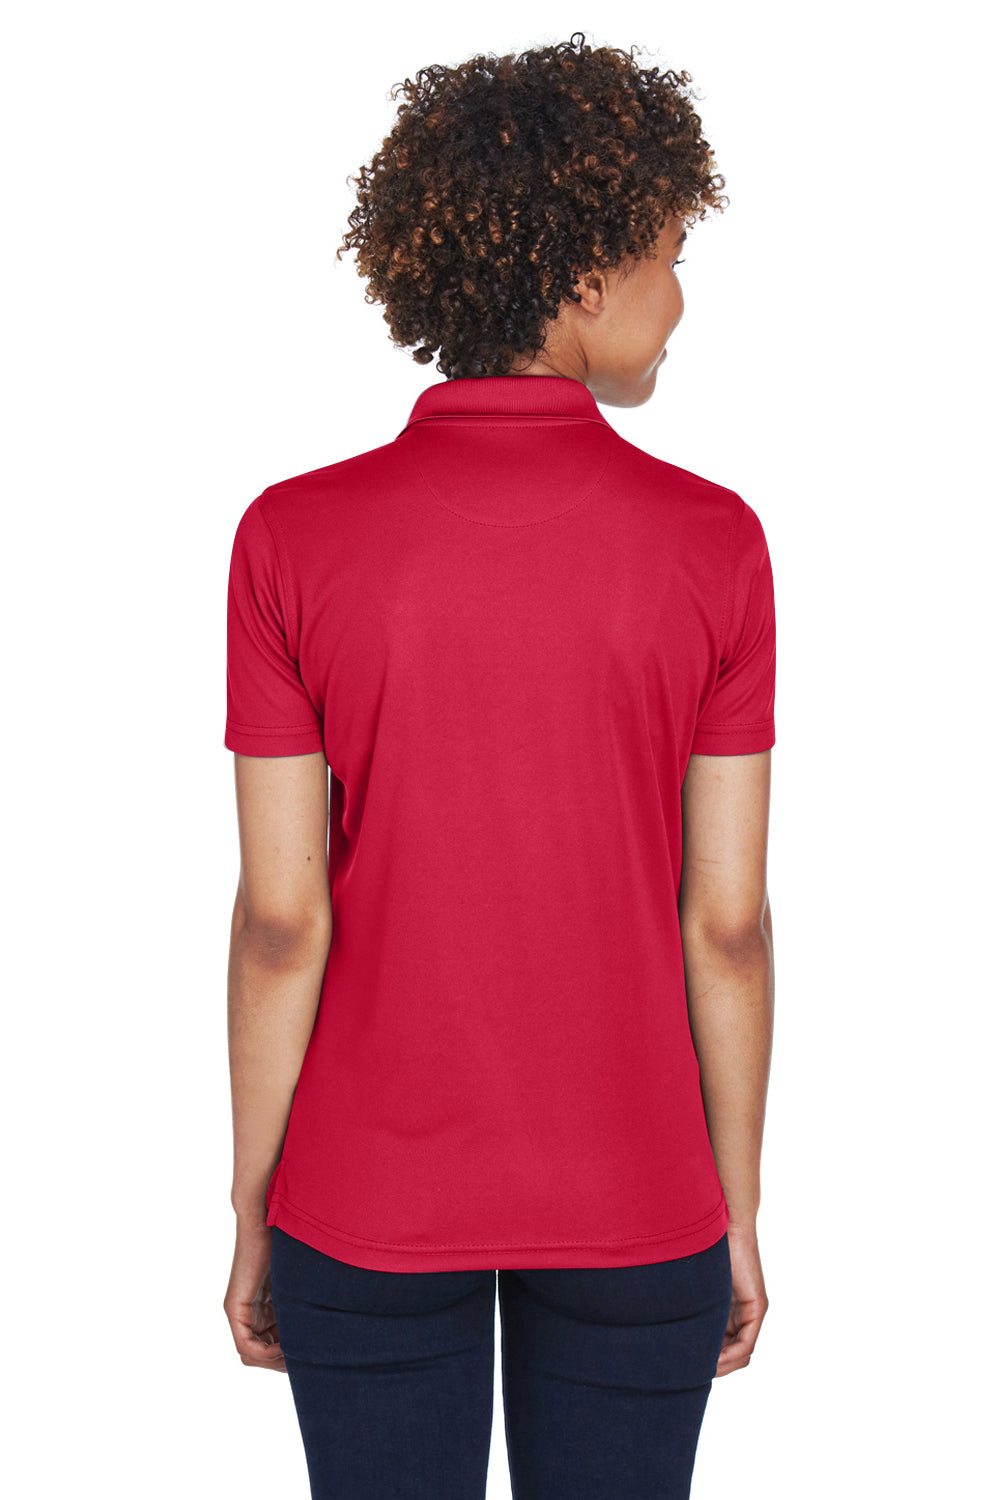 UltraClub 8210L Womens Cool & Dry Moisture Wicking Short Sleeve Polo Shirt Cardinal Red Back